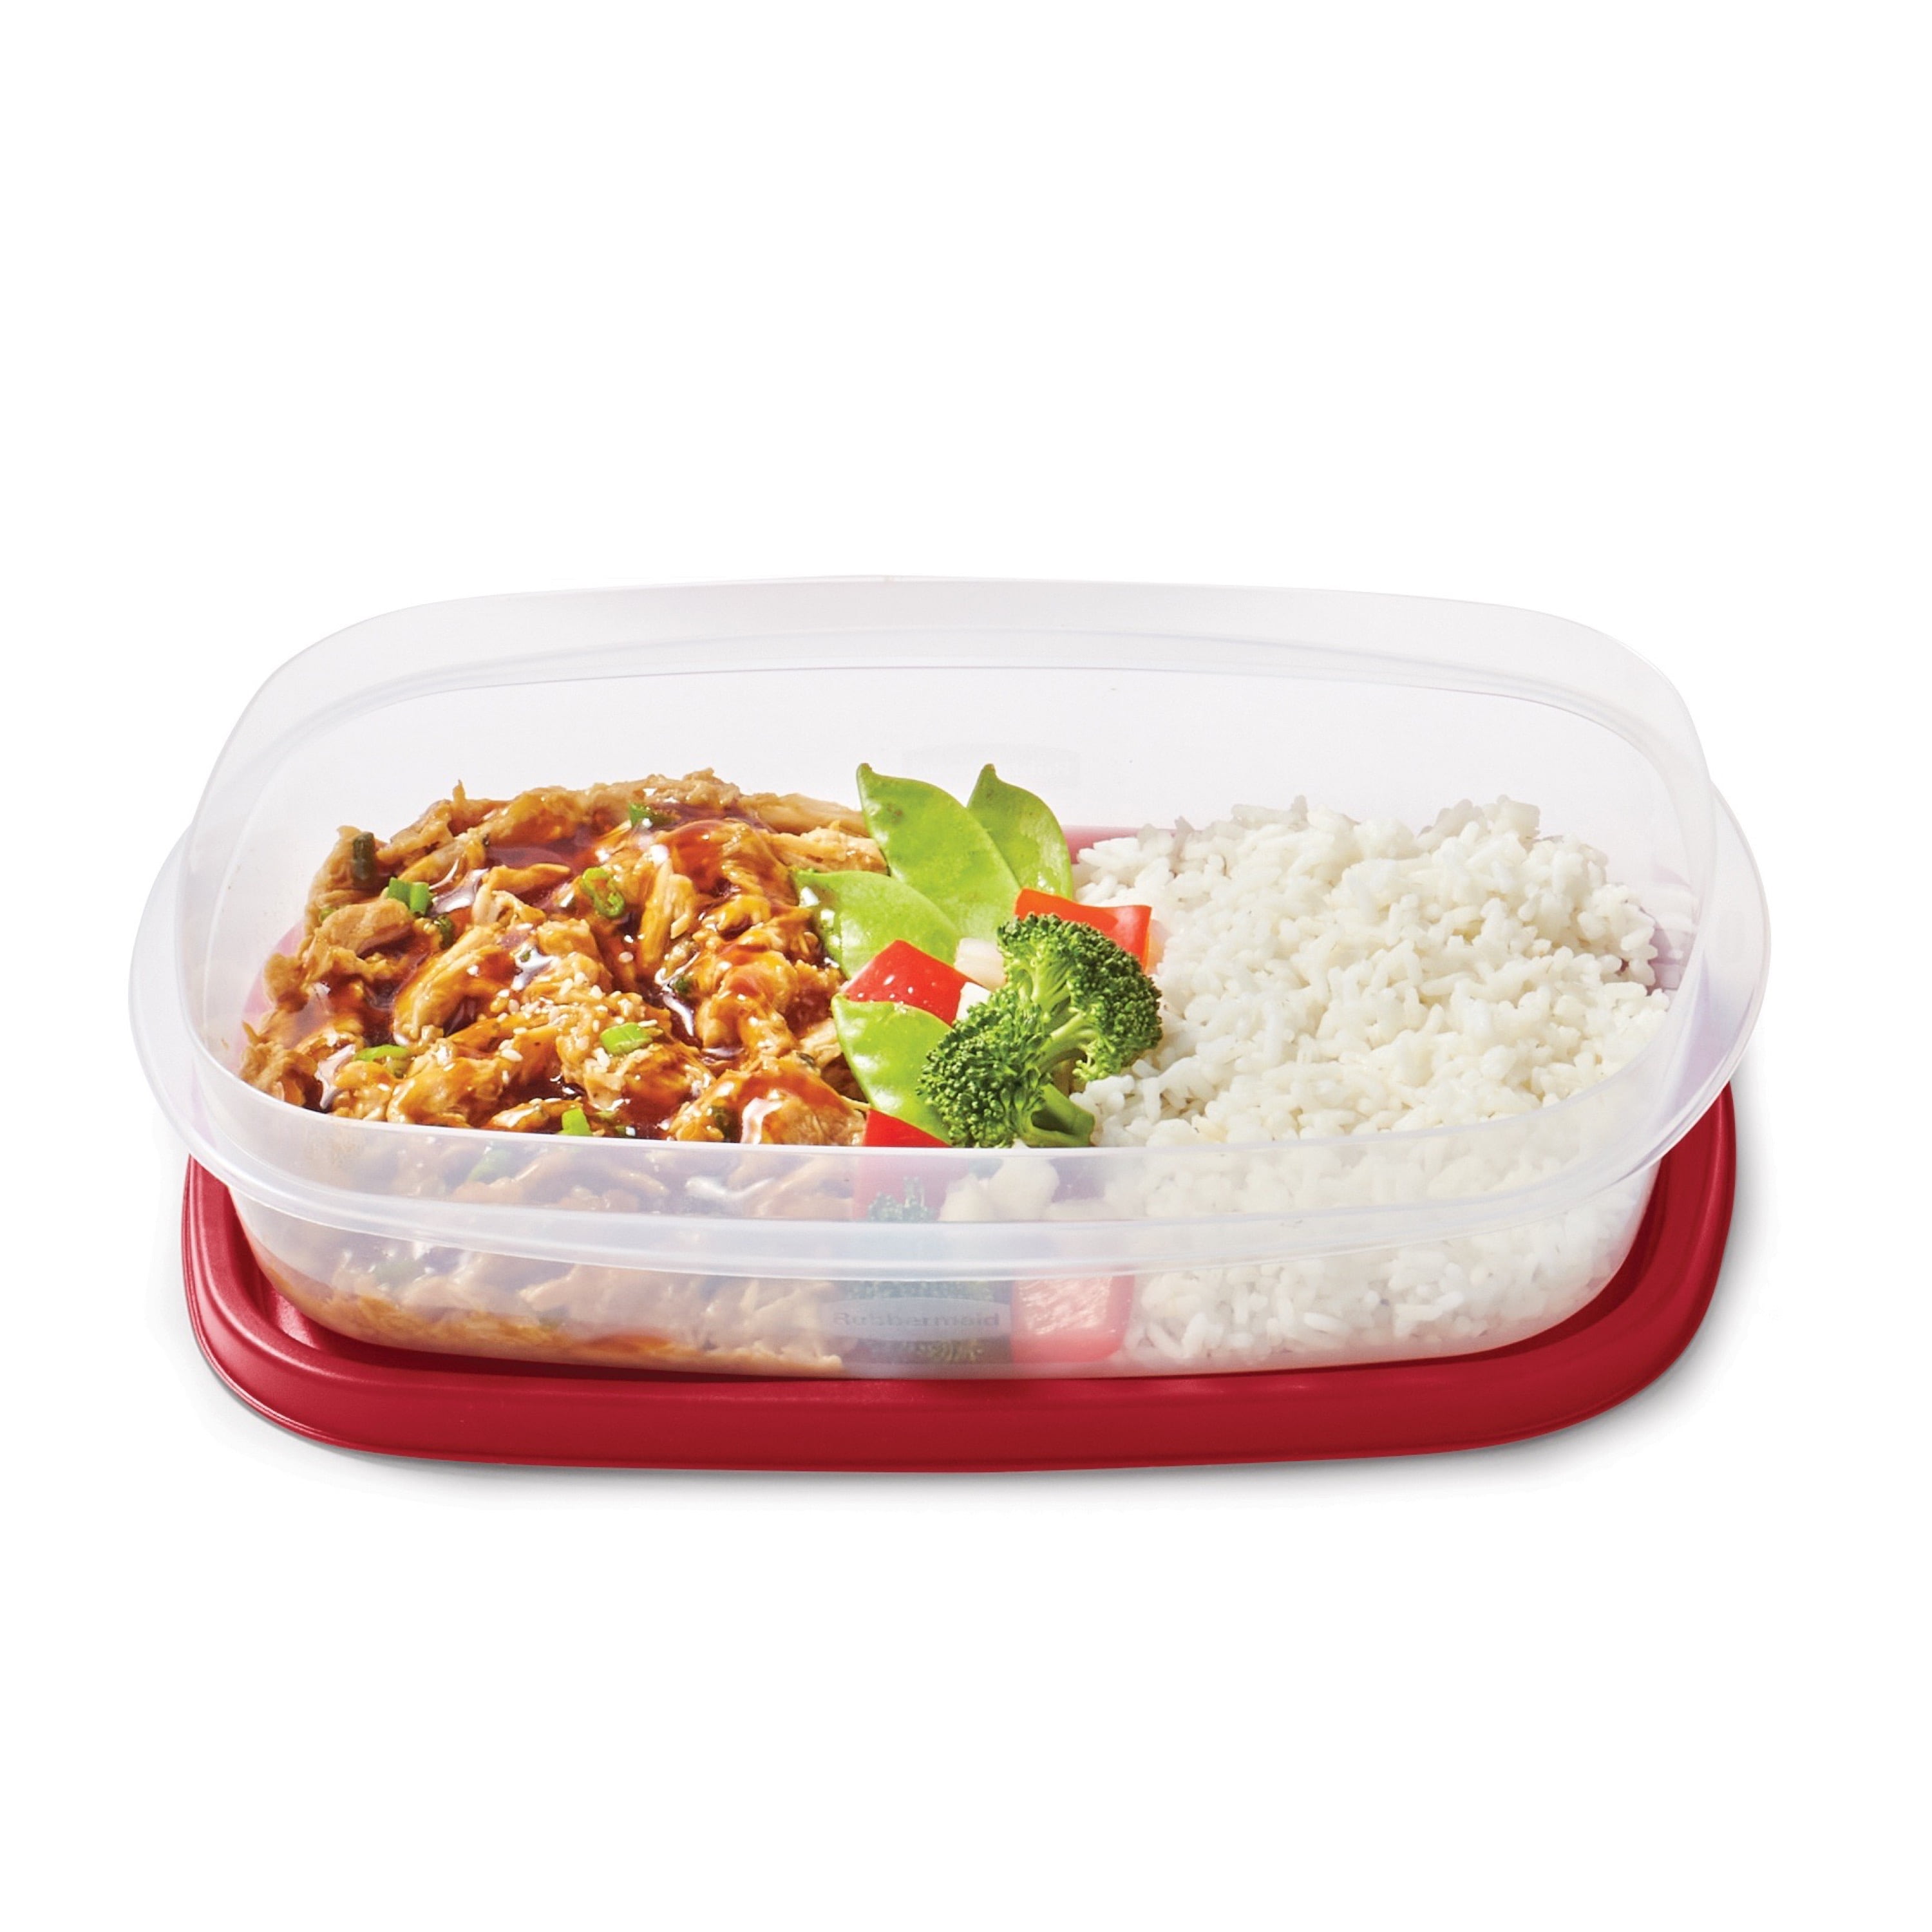 Rubbermaid Easy Find Lids Meal Prep Rectangular Food Storage Containers - 6  Pack - Clear/Red, 5.1 c - King Soopers